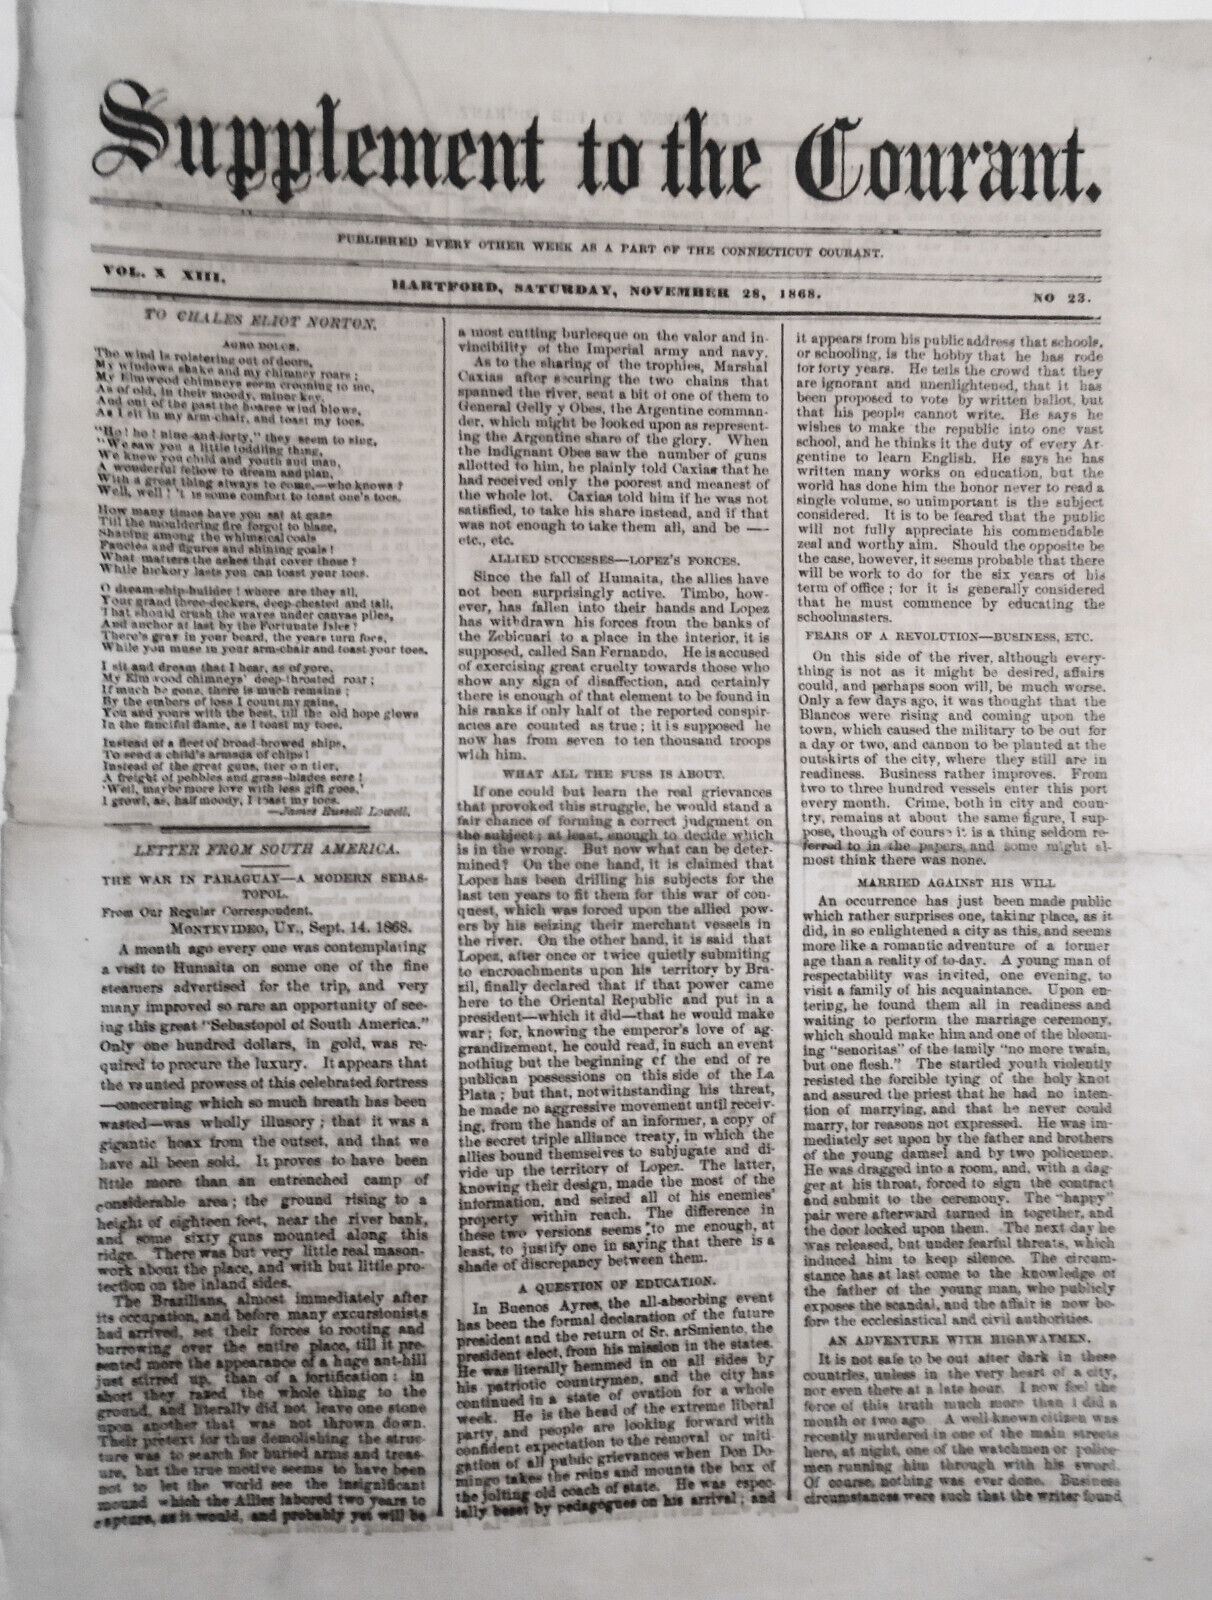 [Freedmen] Elections in South Carolina - Supplement To the Courant, Nov 28, 1868